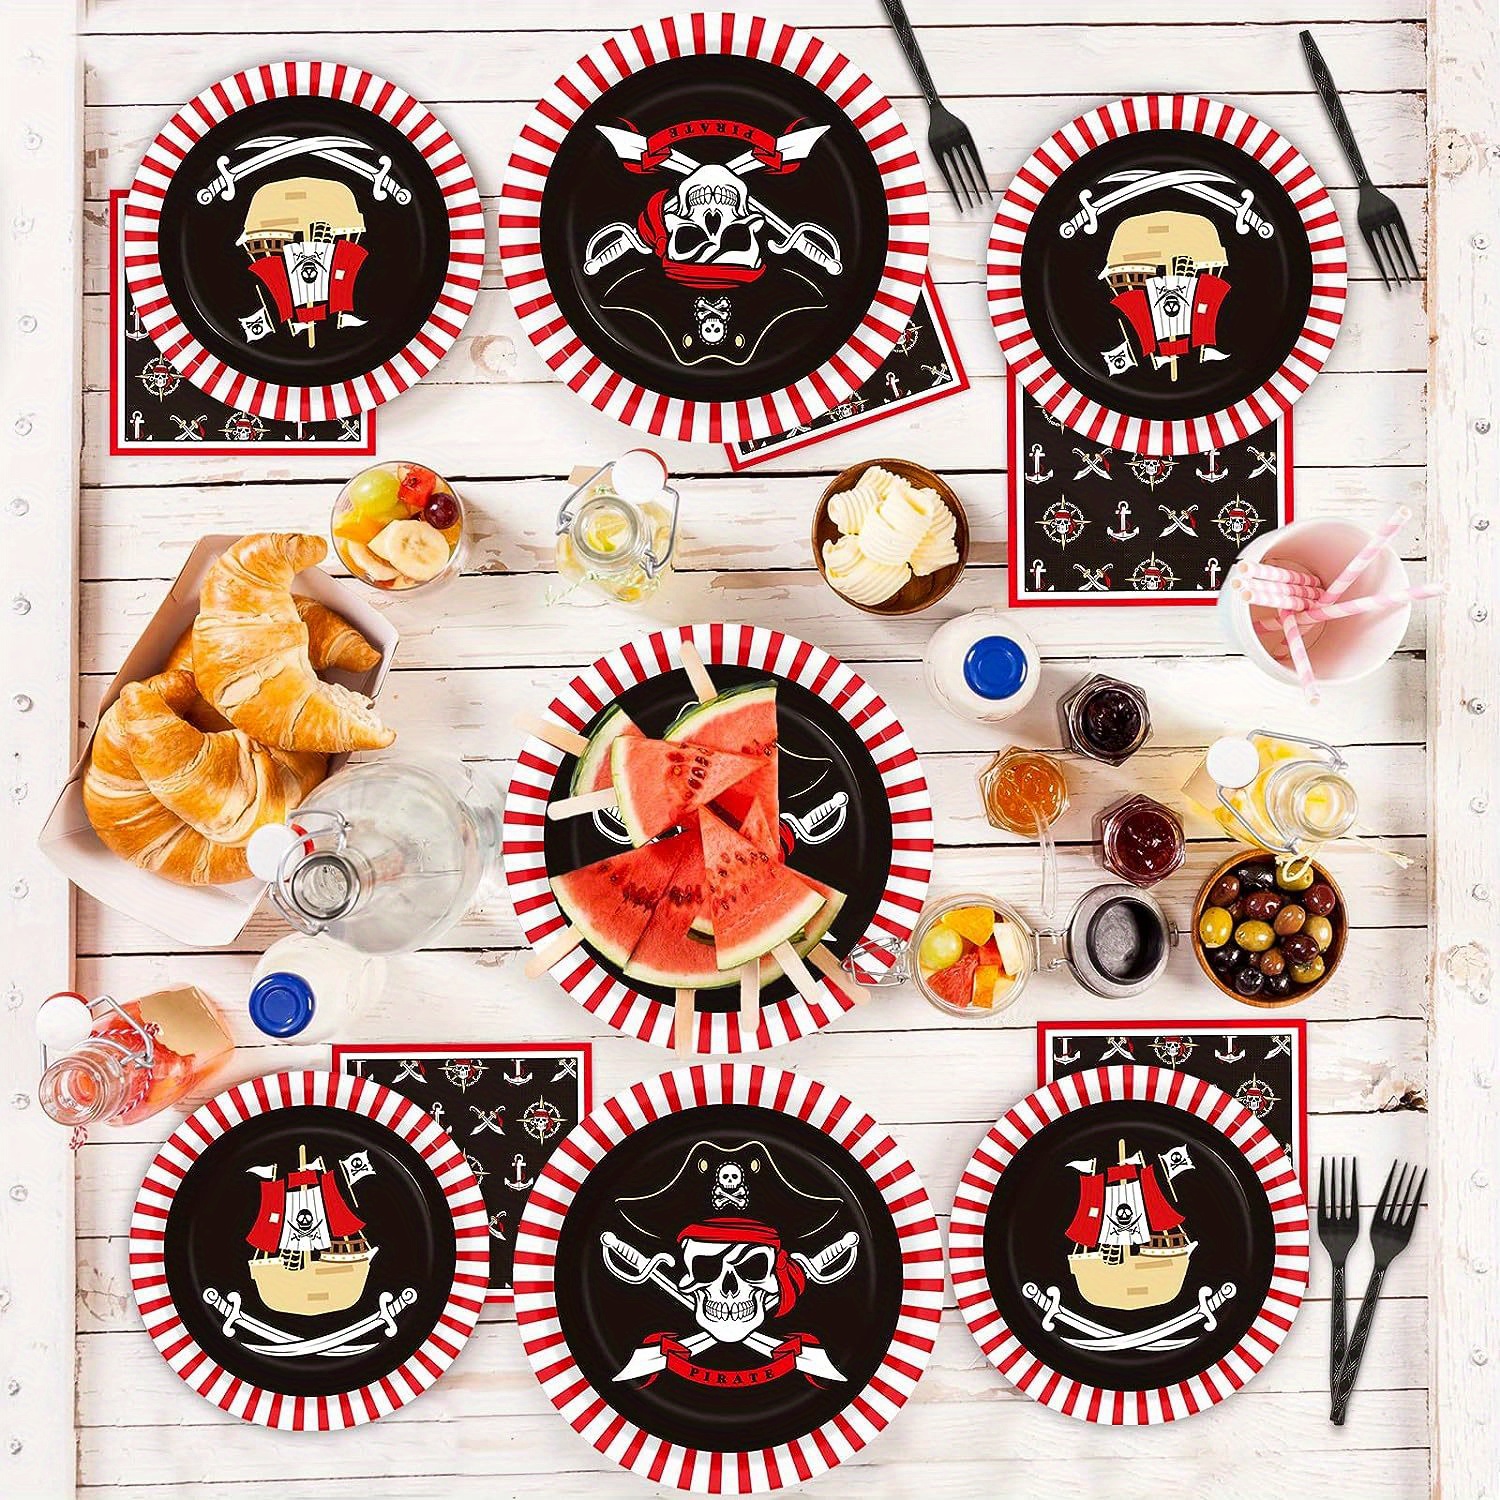  Xigejob Pirate Party Decorations Tableware - Pirate Birthday  Party Supplies, Plate, Cup, Napkin, Tablecloth, Cutlery, Pirate Theme Baby  Shower Birthday Plates And Napkins Party Decorations